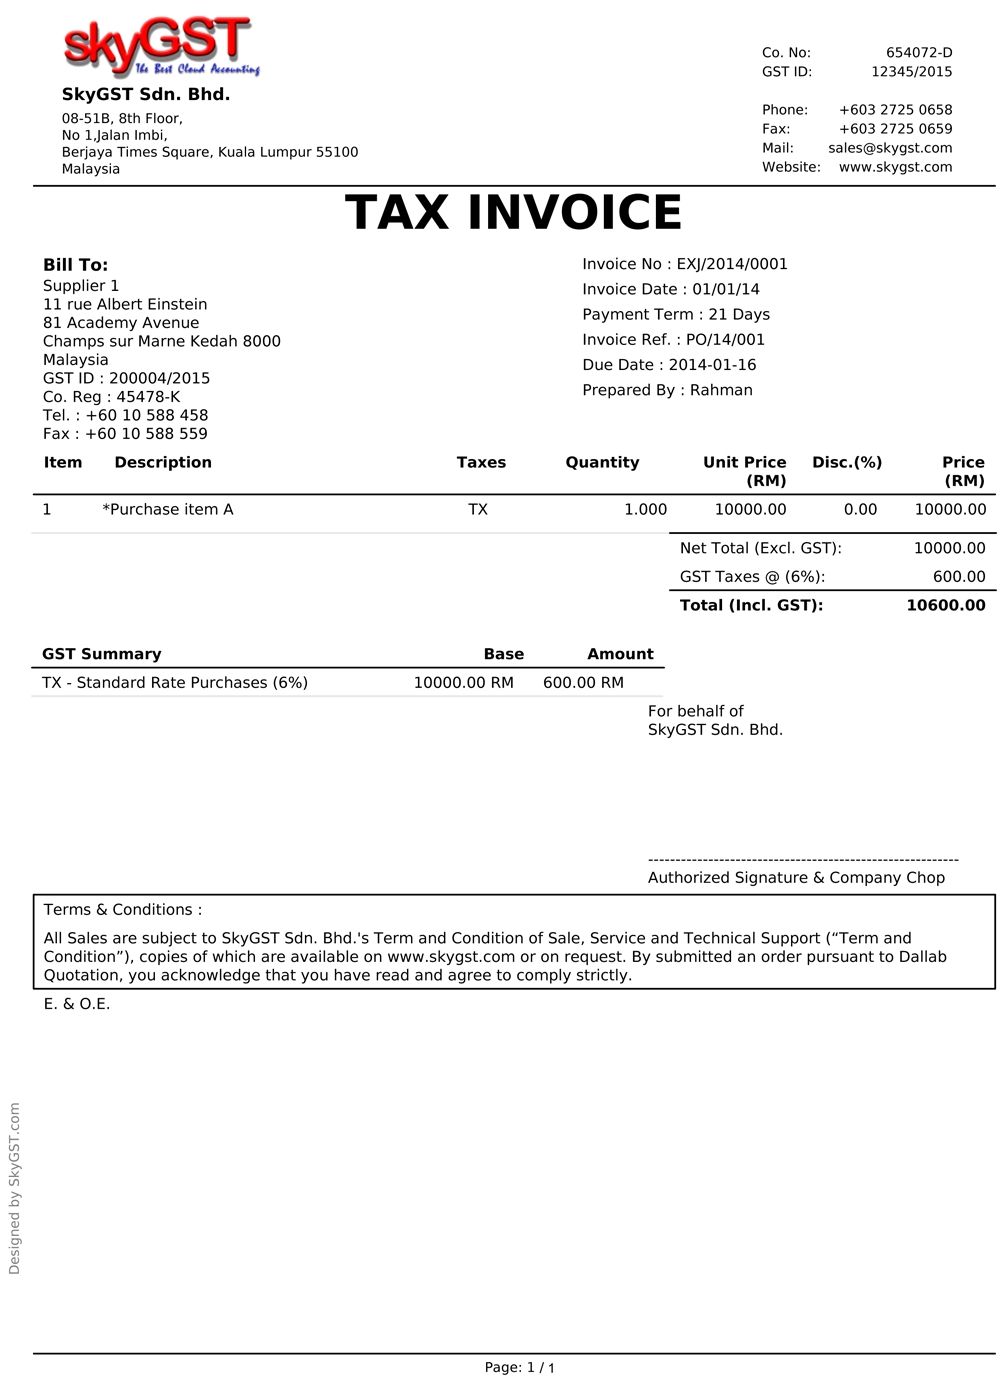 this tax invoice ok or not requirements of tax invoice